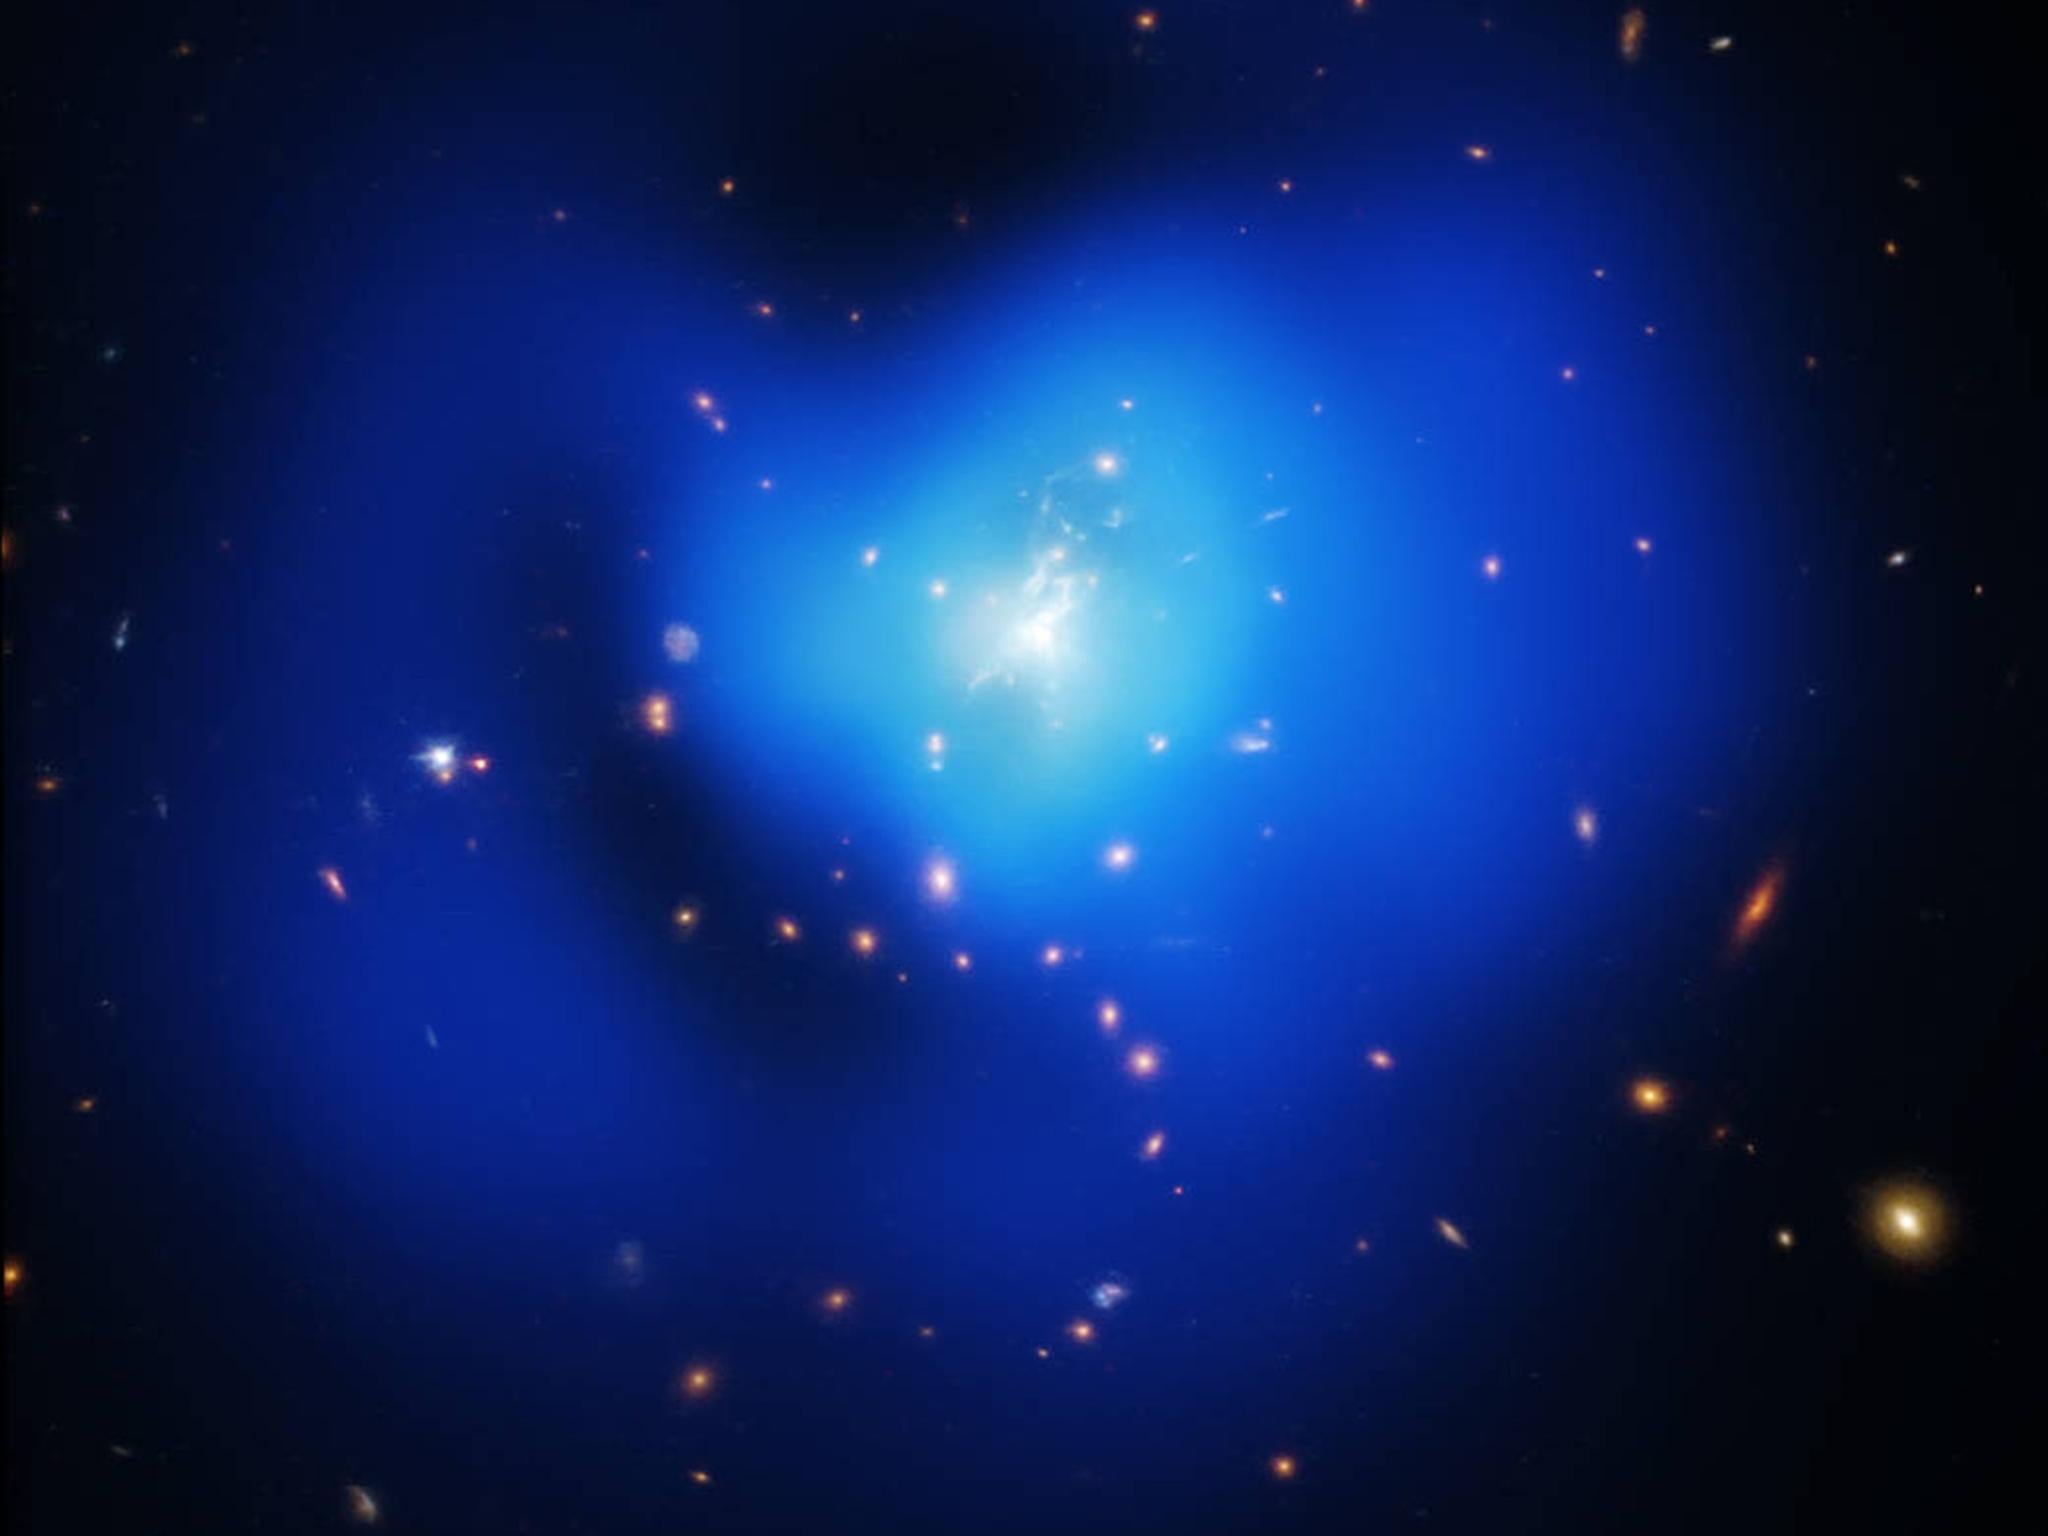 A galaxy cluster, like this one, is thought to contain vast amounts of dark matter that cannot be seen but has a gravitational effect